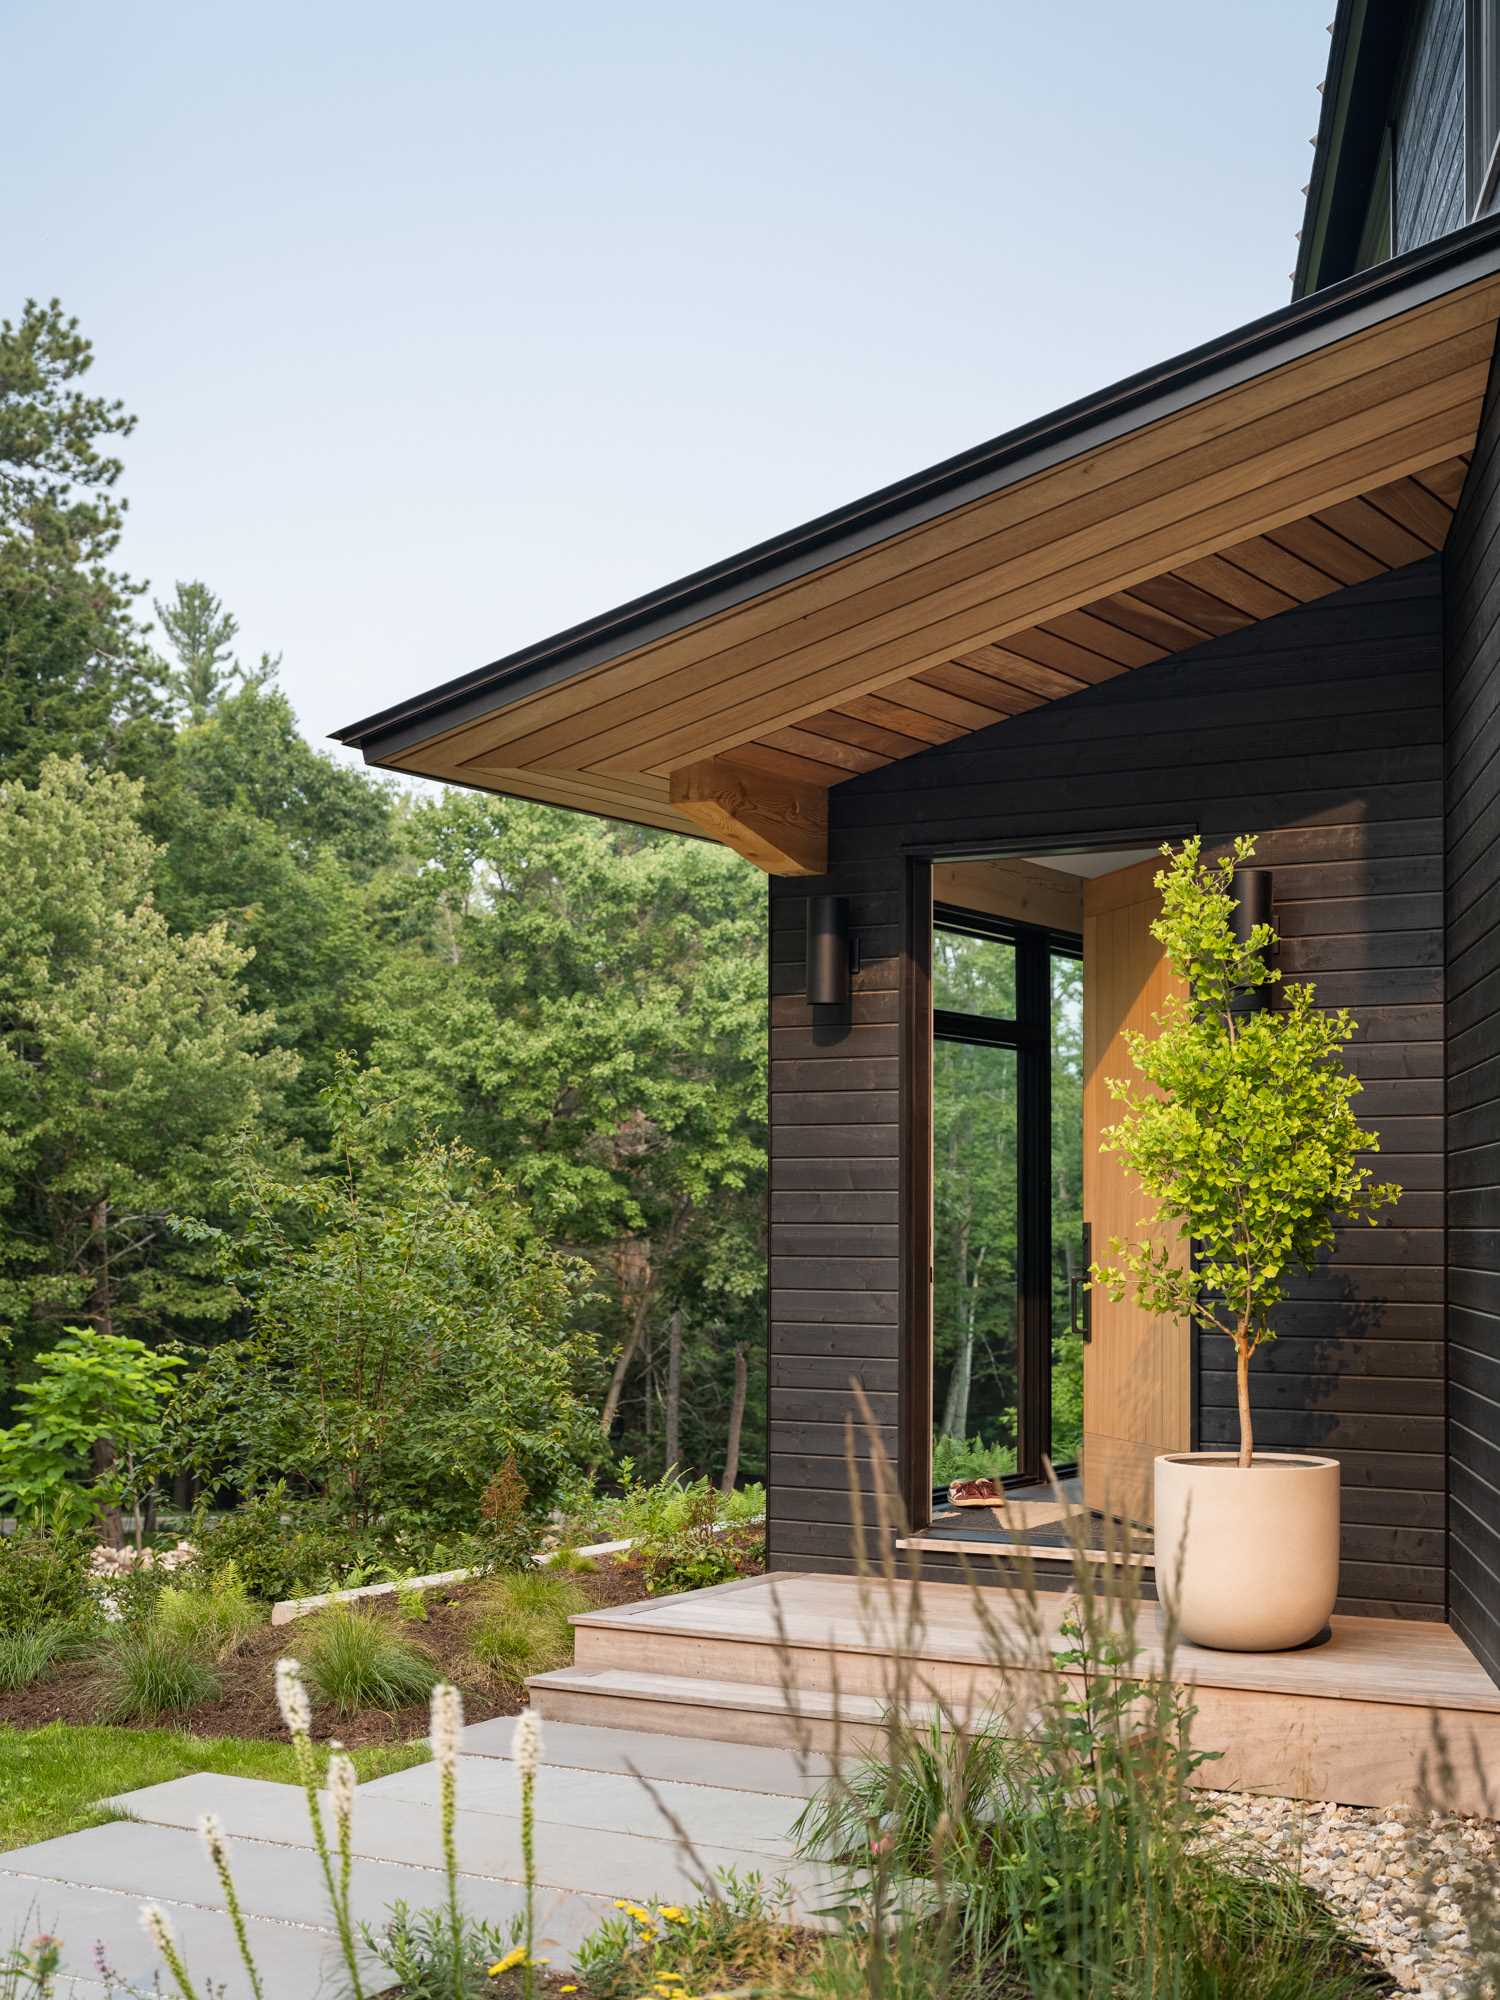 Lighting on either side of the front door welcomes people to this modern home with black stained wood siding.